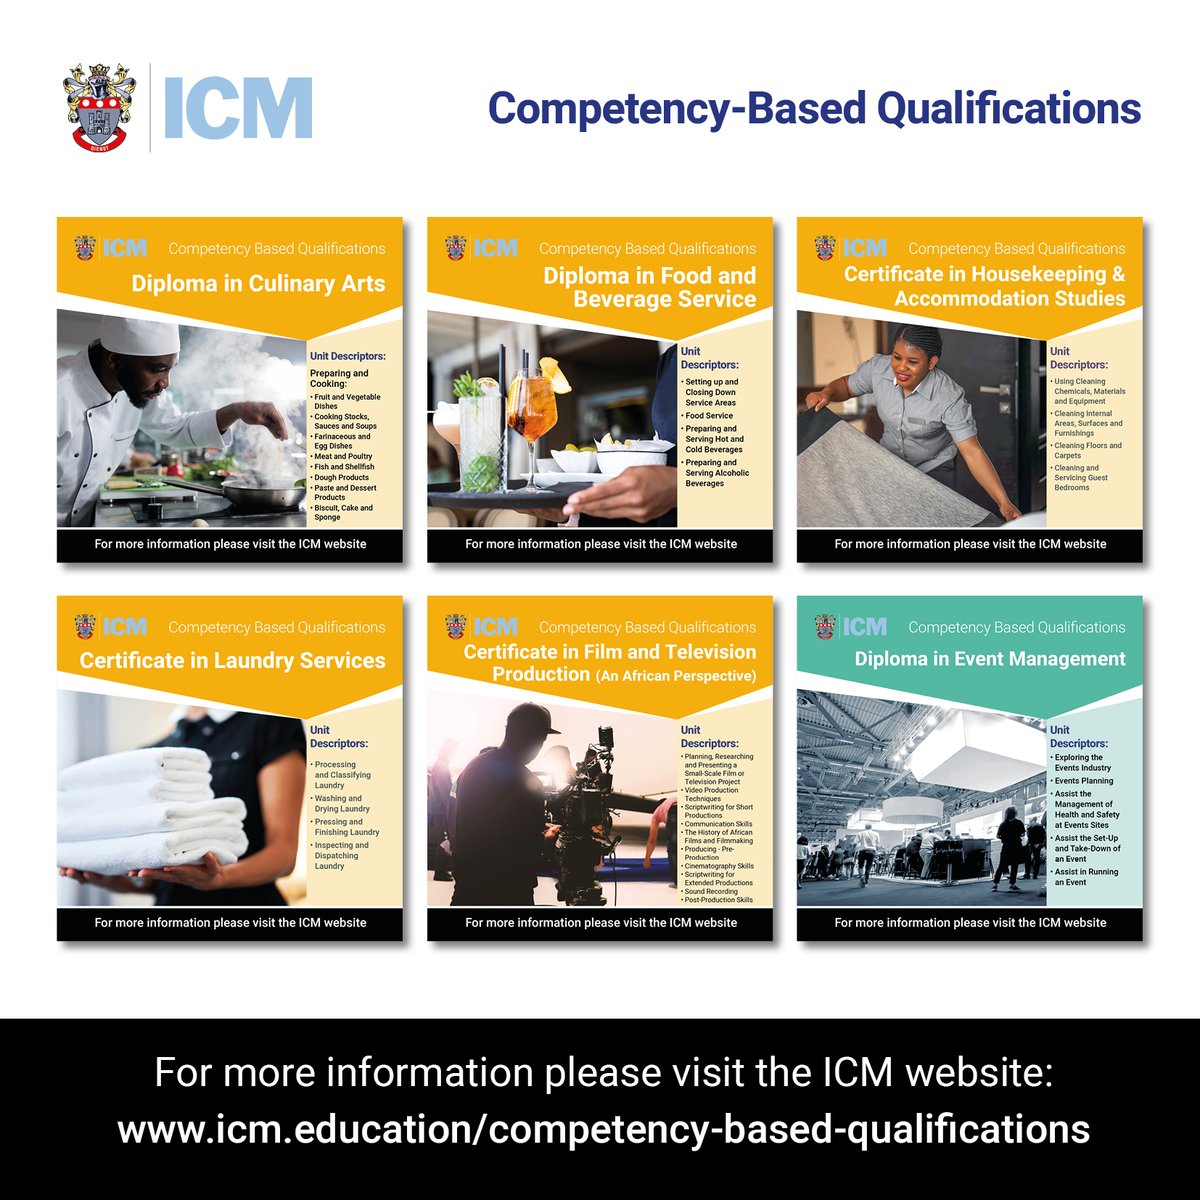 Check out full details of all our CBQs on our website here:
icm.education/competency-bas…
#competencybasedqualifications #CBQ #hospitality #eventmanagement #filmandtelevision #qualification #hospitalityqualification #ICM